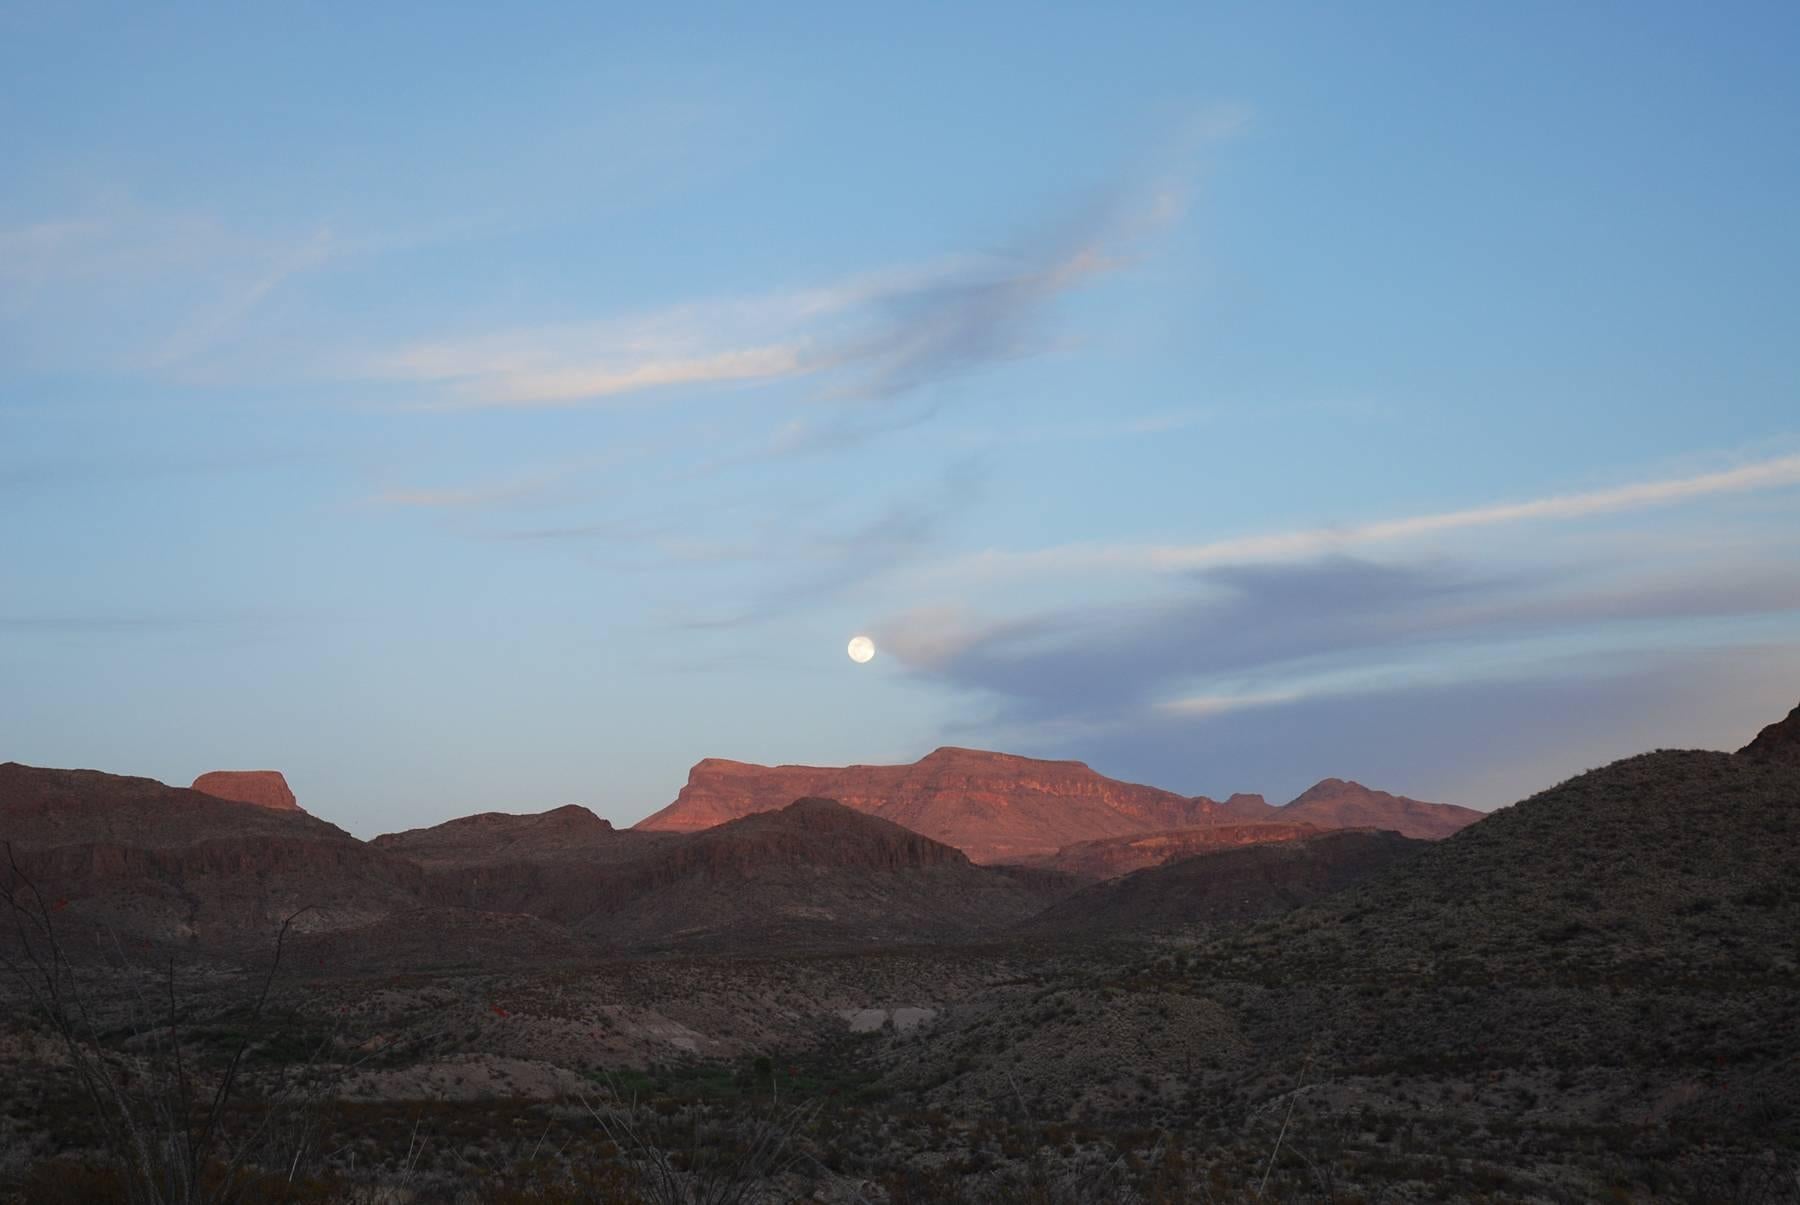 West Texas: Full moon over the Chisos Mountain, Big Bend National Park